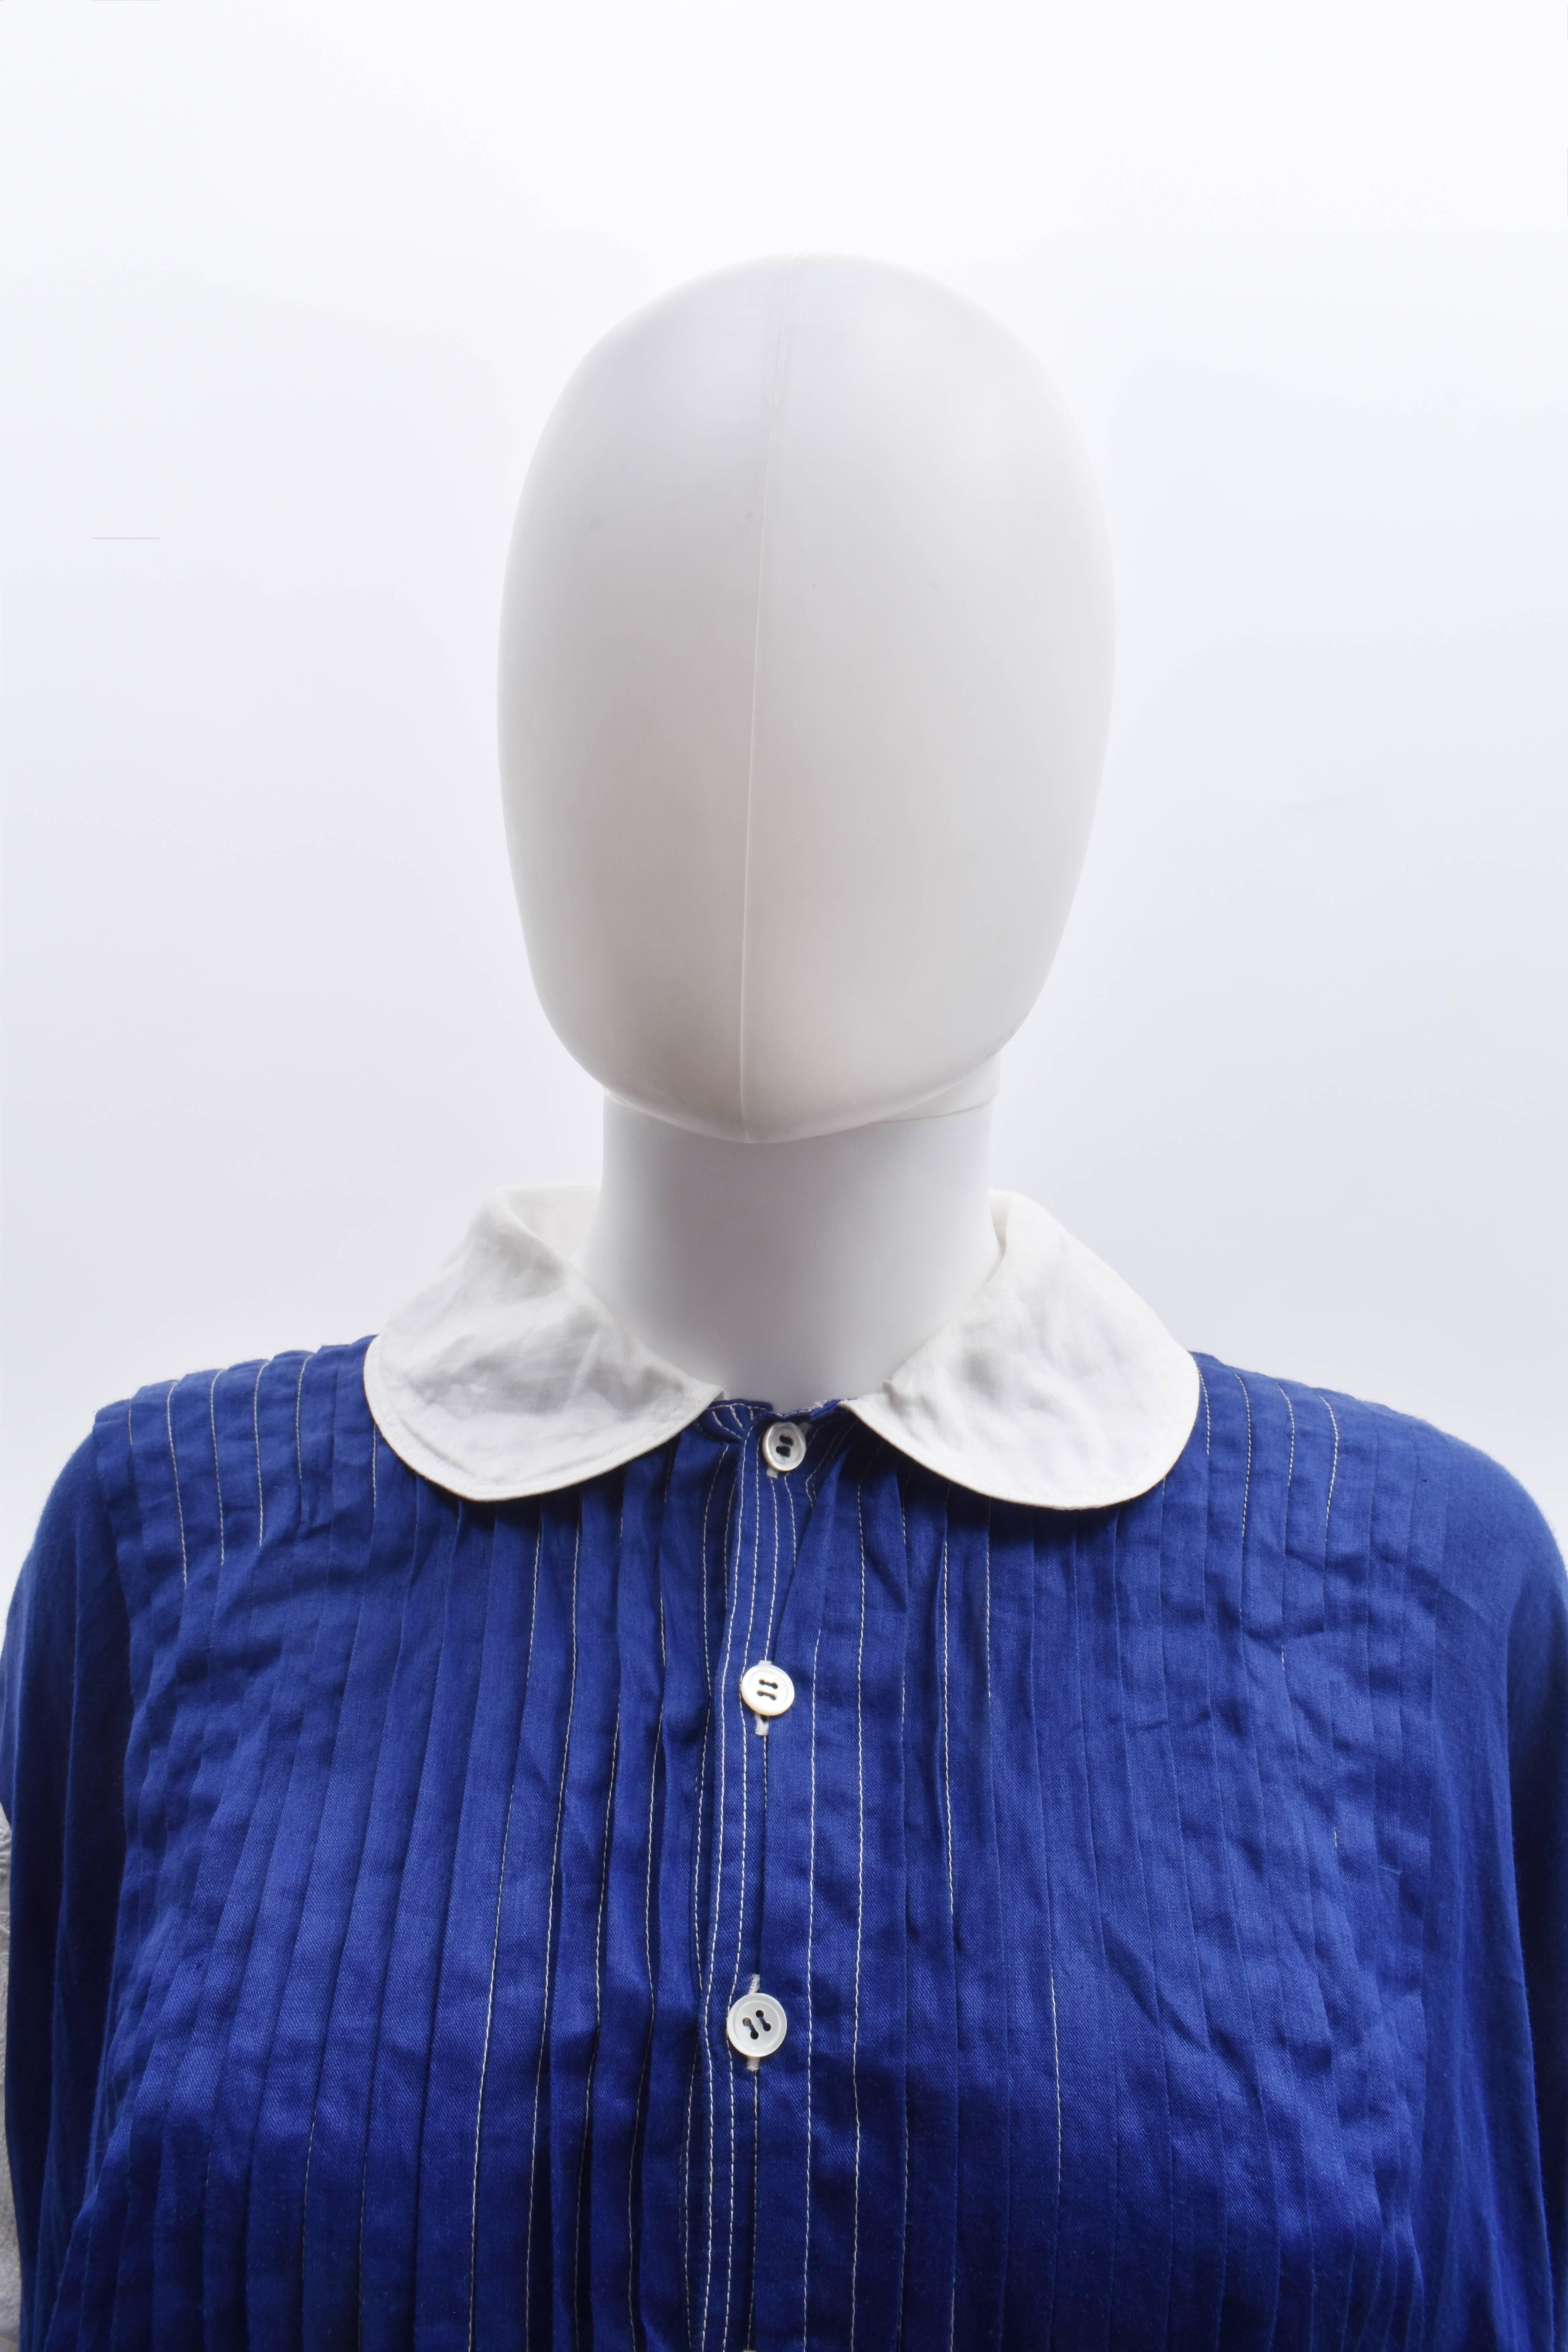 Junya Watanabe Blue Linen Shirt Dress with White Collar and Contrast Stitching S 2